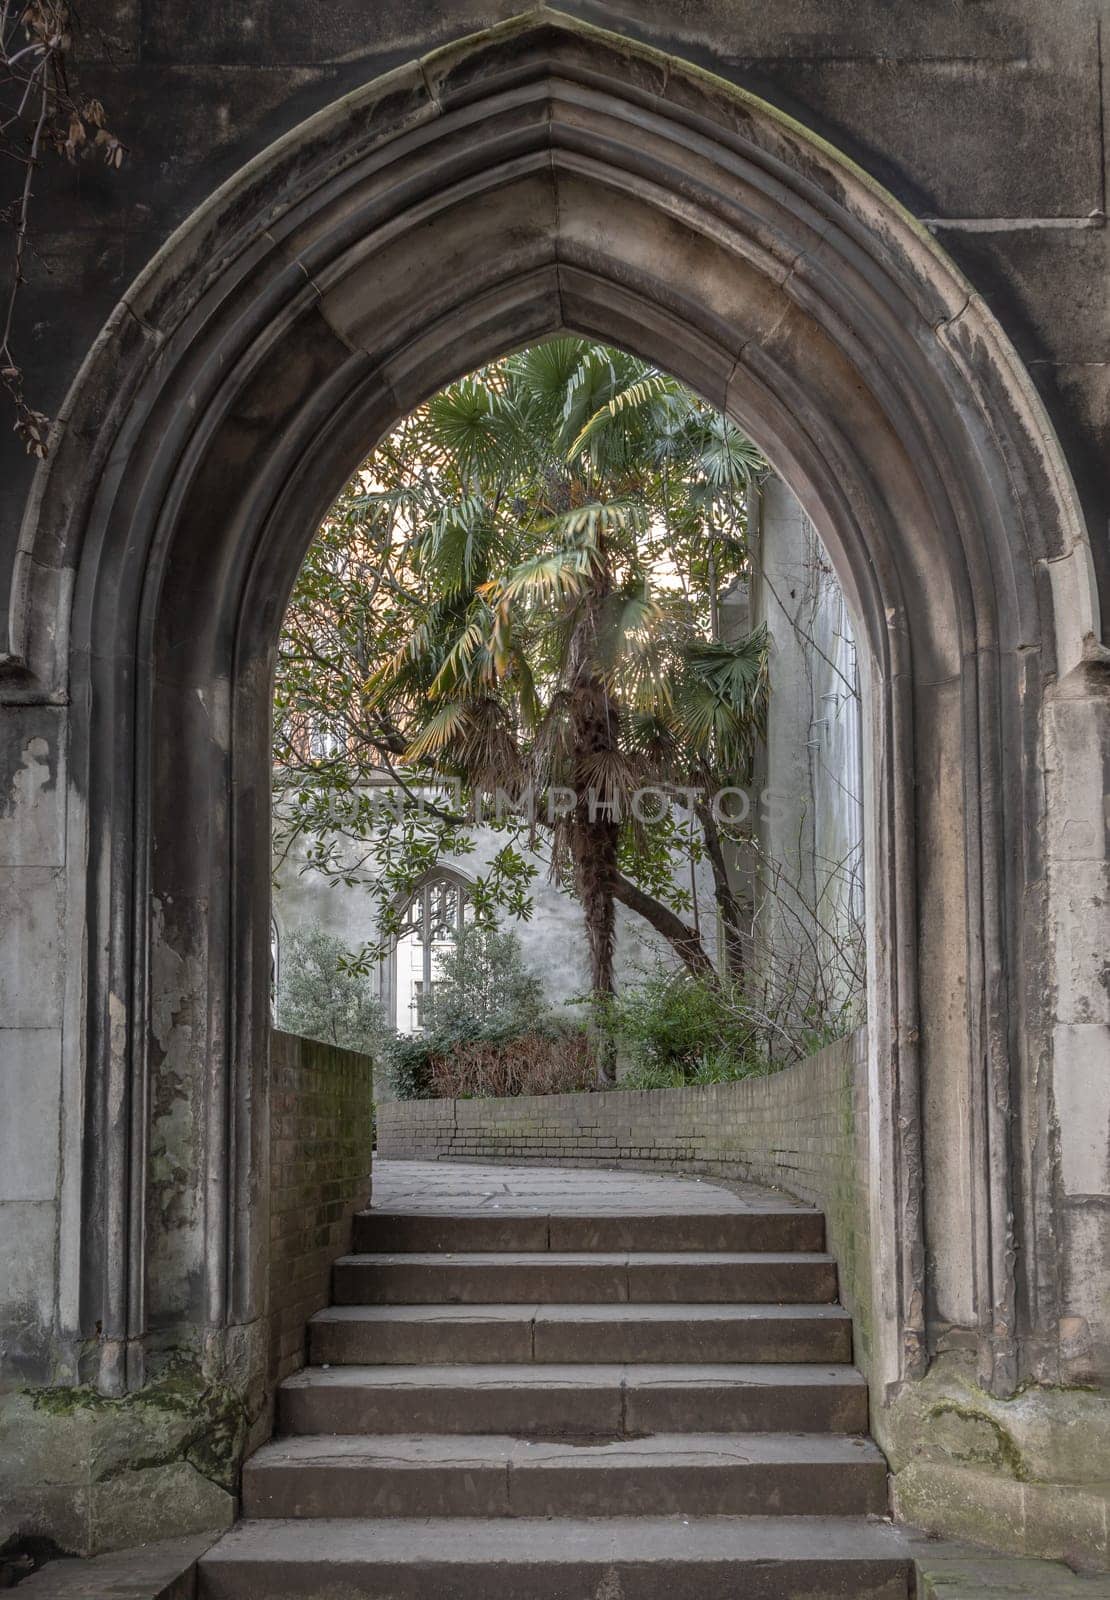 London, UK - Feb 27, 2024 - The stone arched entrance leads to the stone staircase inside of St Dunstan in the East Church Garden. The historic church was bombed and destroyed in the Second World War and is now a park, London city hidden places, Copy space, Selective focus.